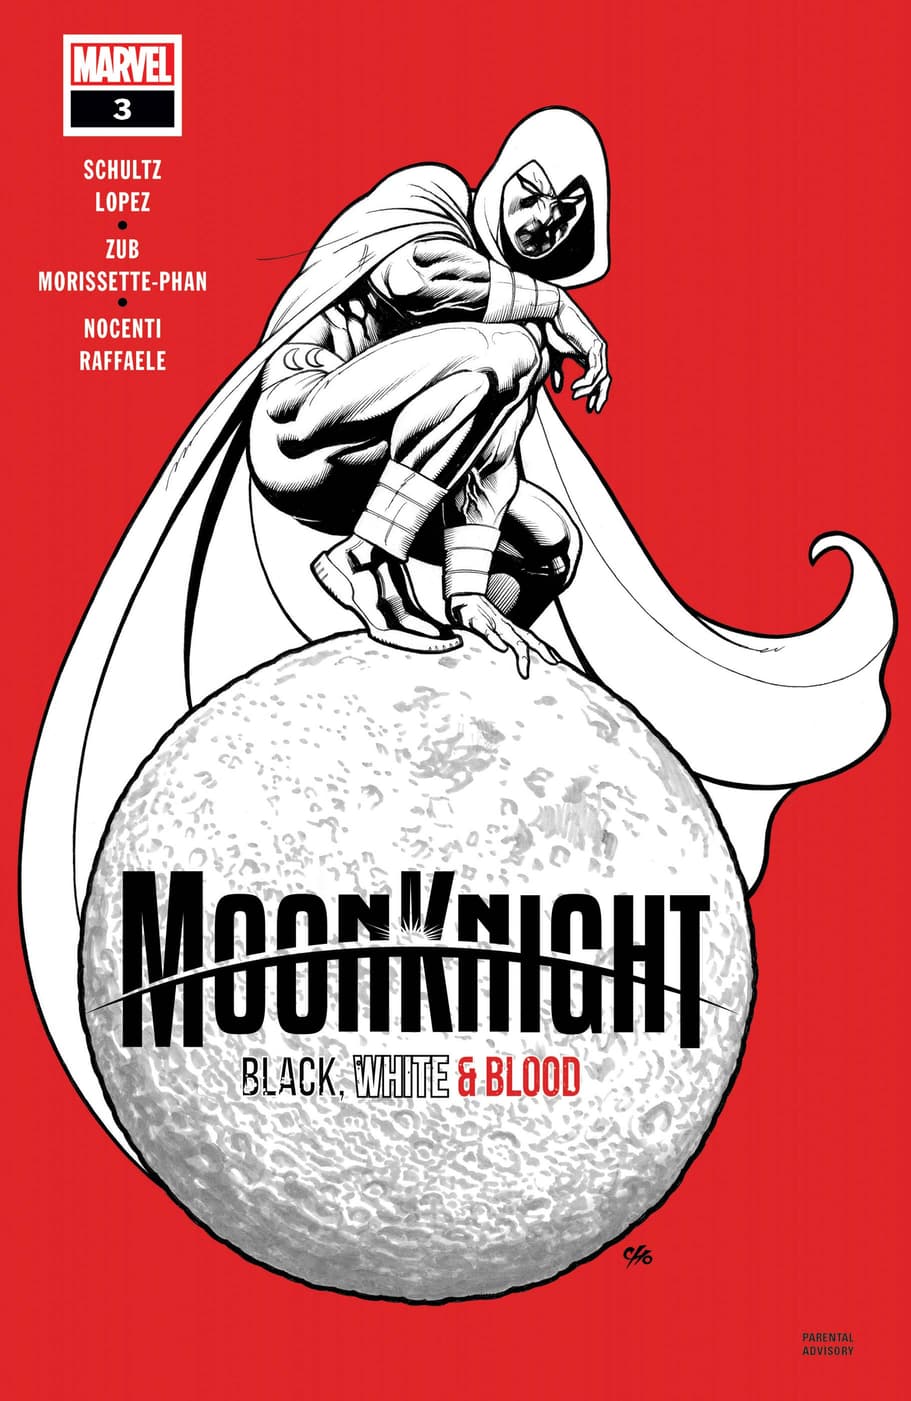 MOON KNIGHT: BLACK, WHITE & BLOOD (2022) #3 cover by Frank Cho